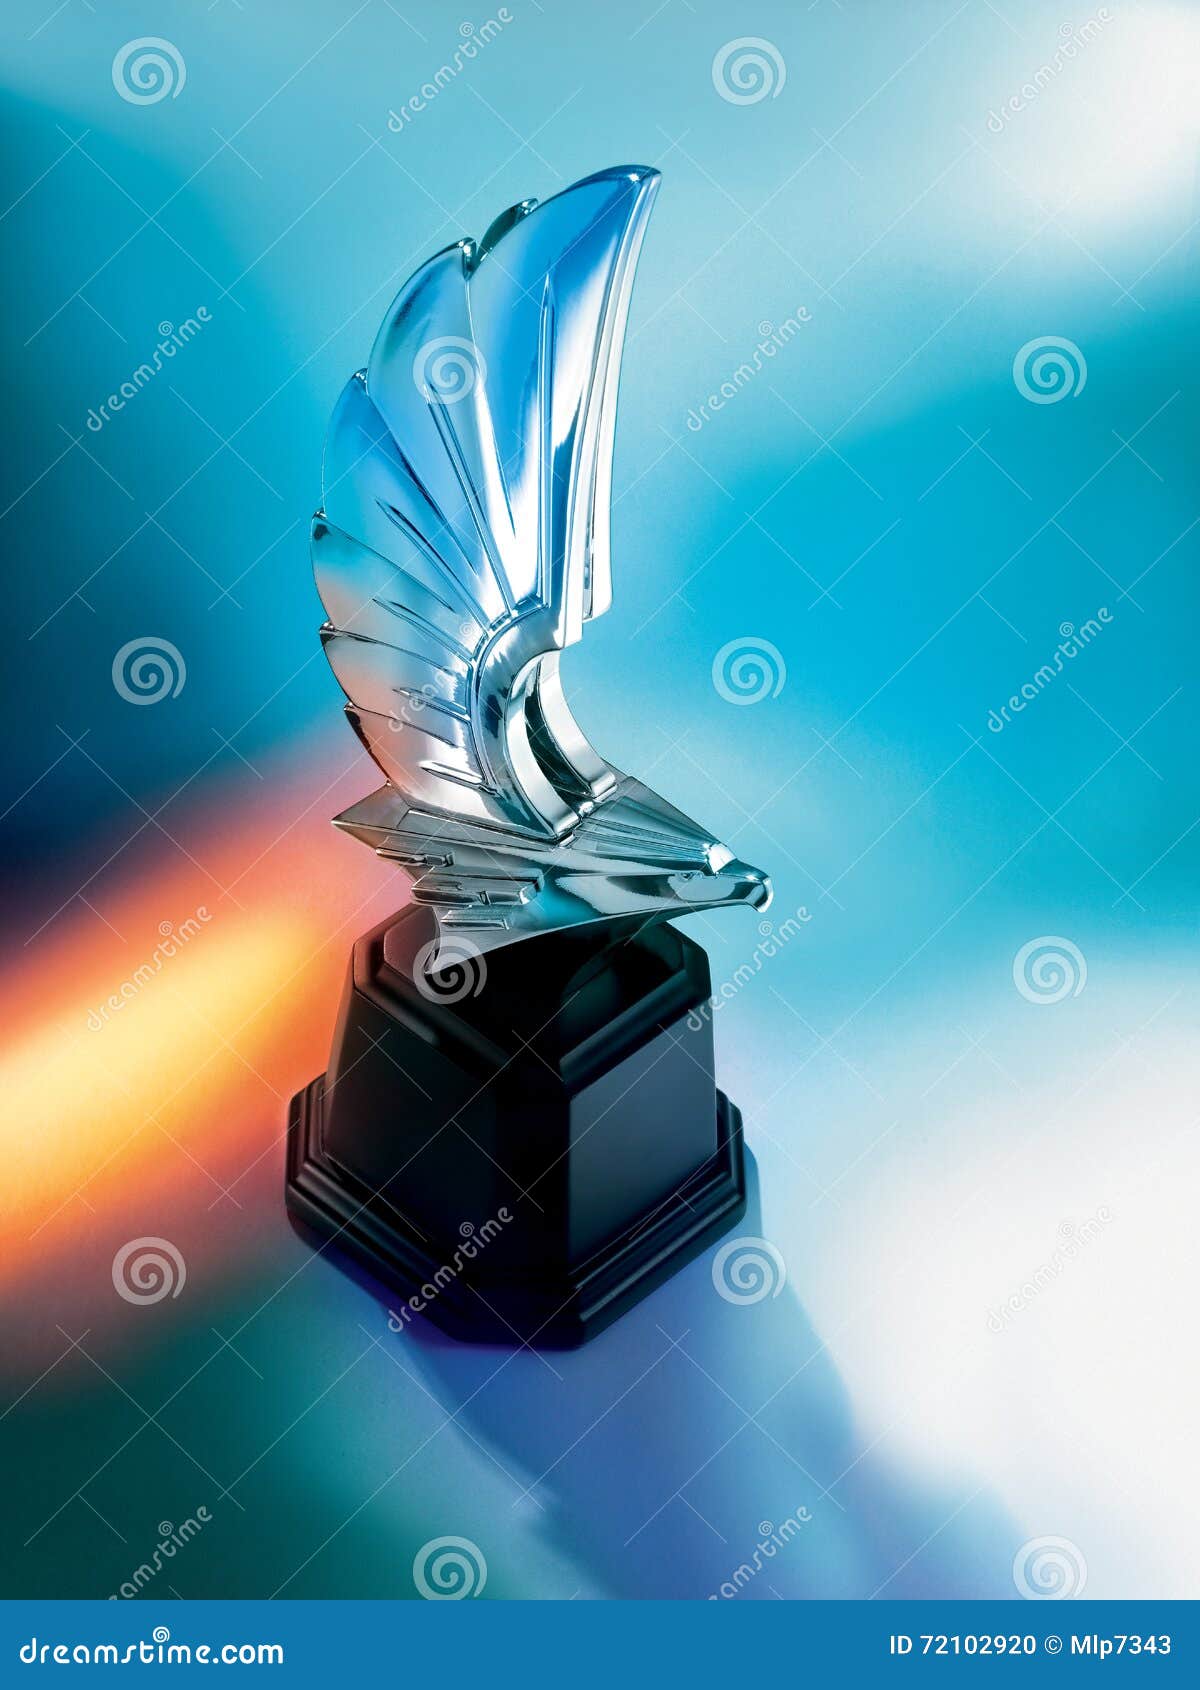 Eagle trophy stock photo. Image of champion, silver ...